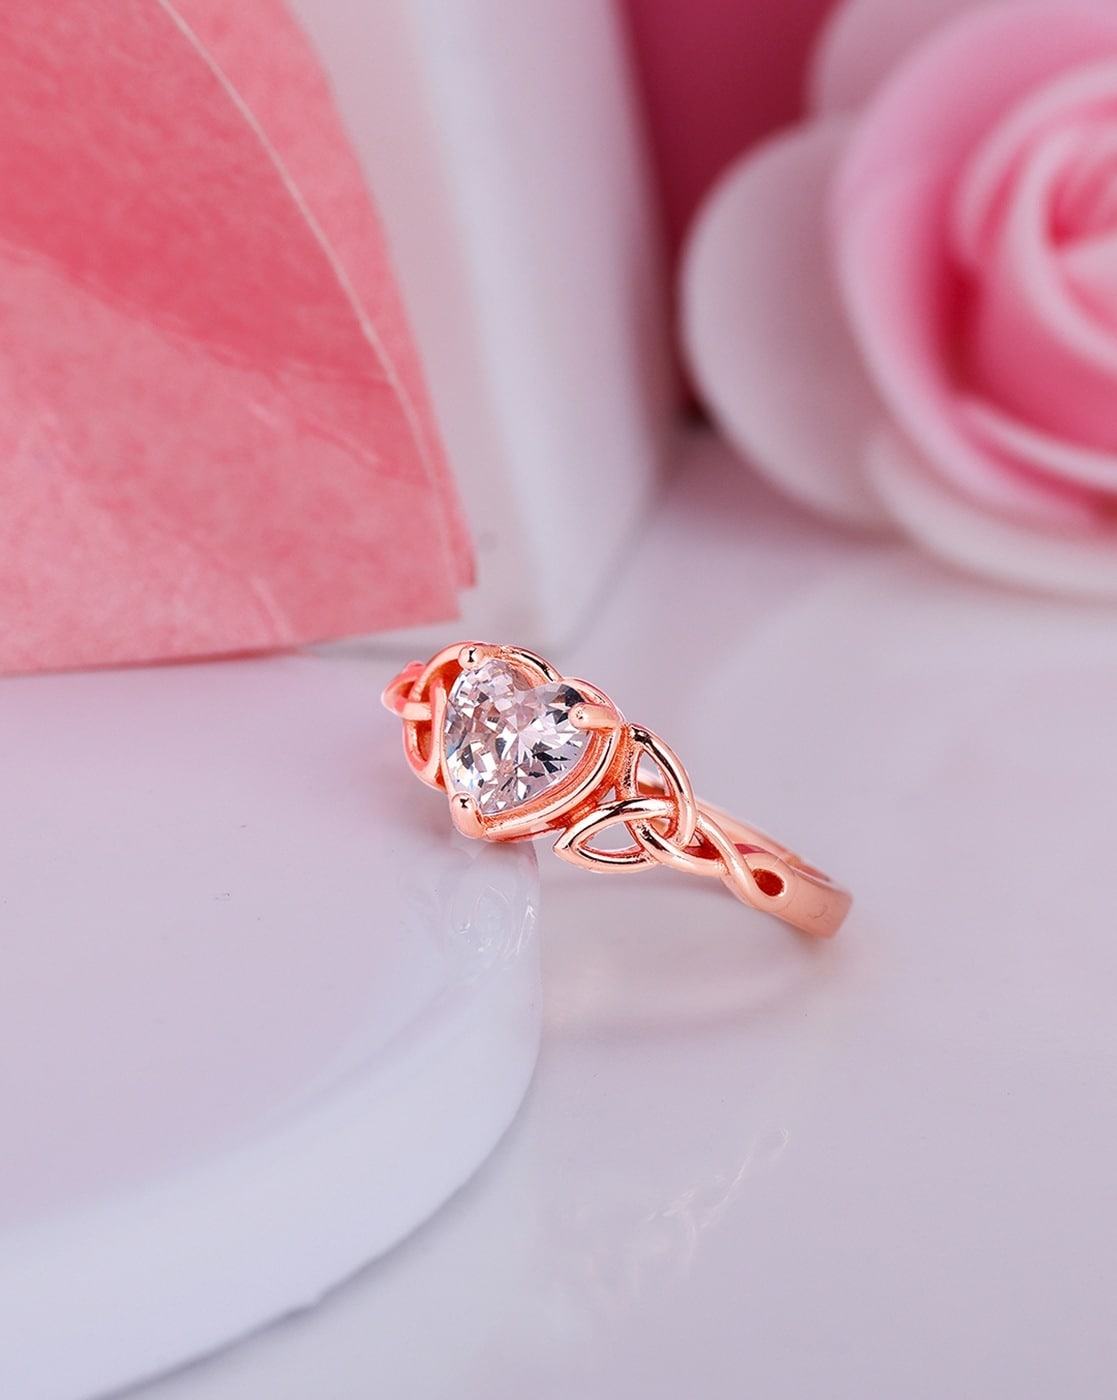 52 simple engagement rings for girls who love classic style 2019 2 »  Welcome #eternitystyl… | Black diamond ring engagement, Amethyst ring  engagement, Wedding rings